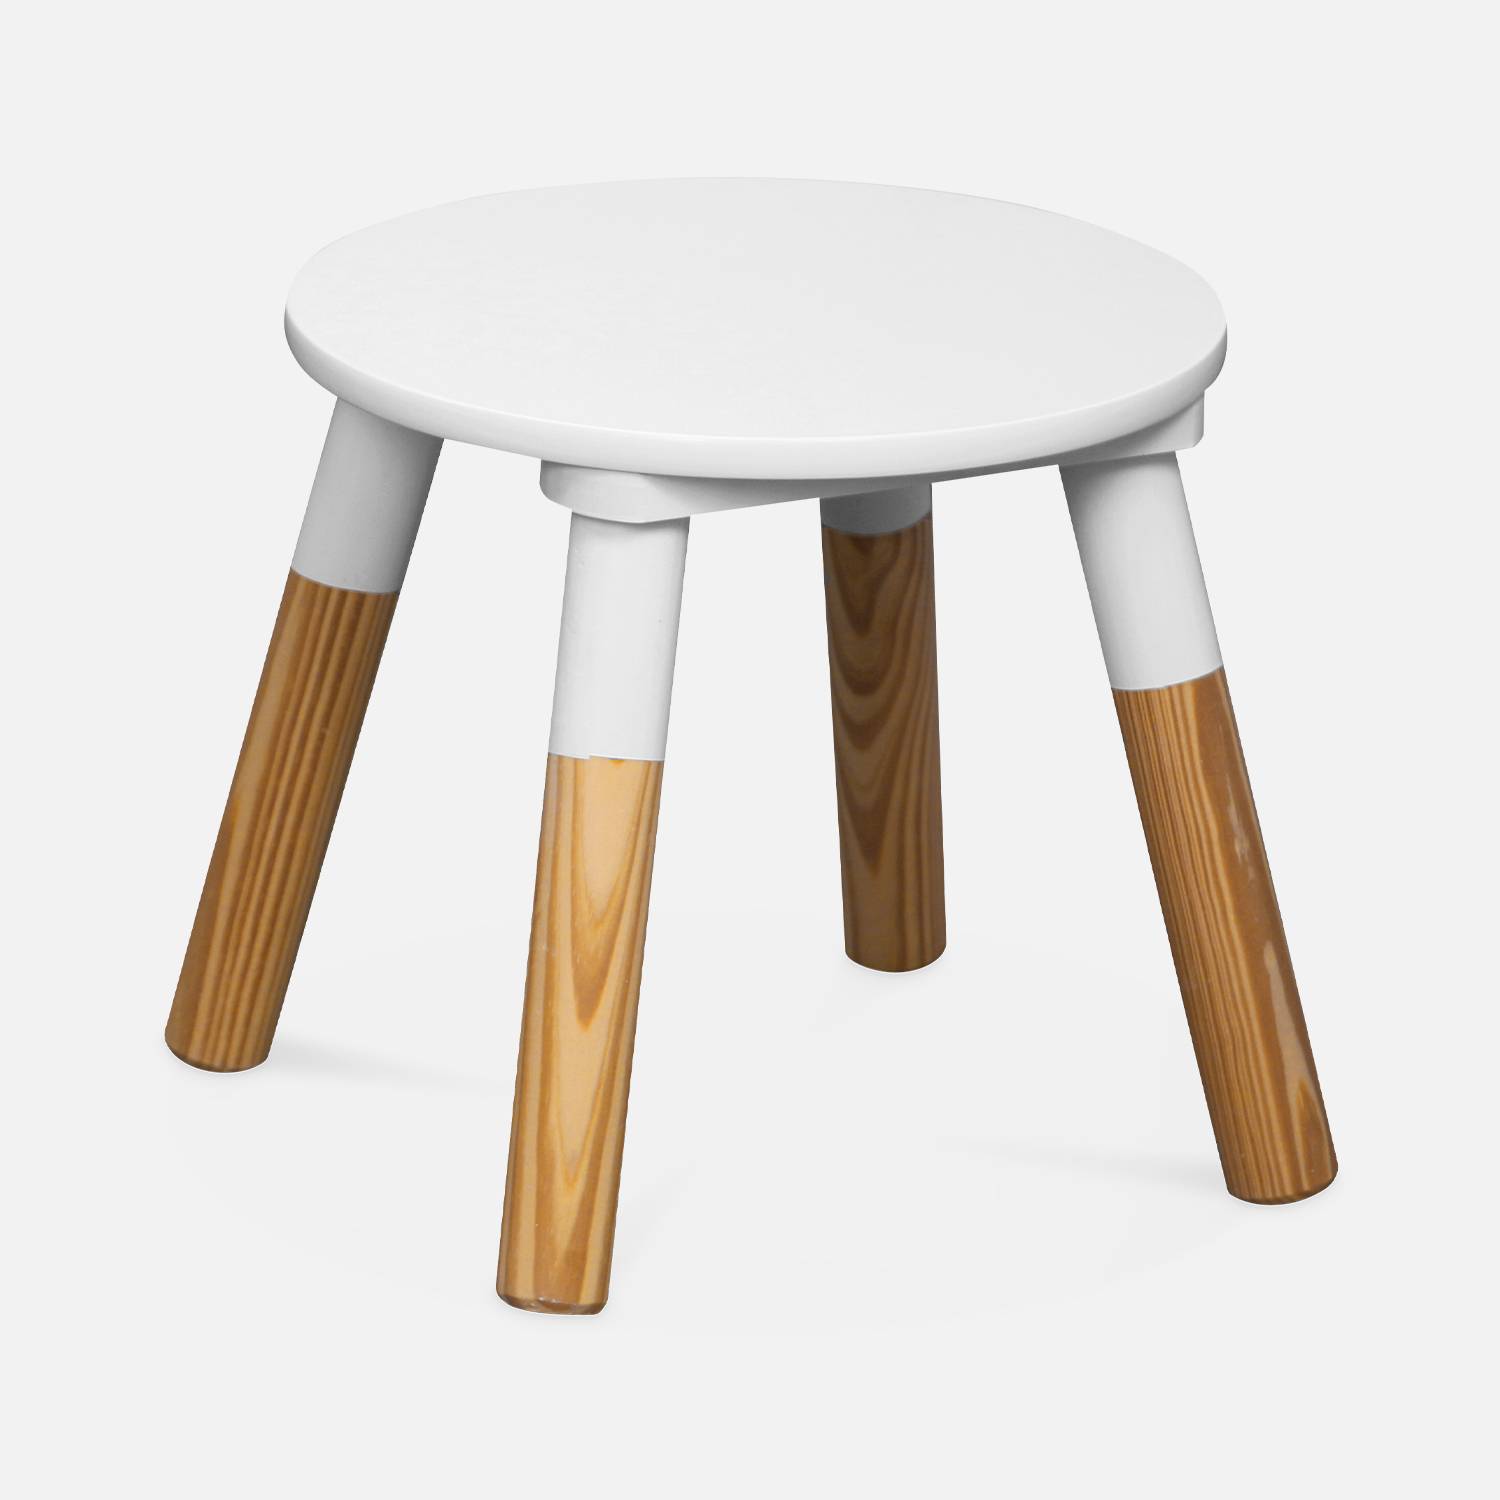 Children's round table with two stools, 55x55x43cm - Tobias - natural pine, painted White,sweeek,Photo6